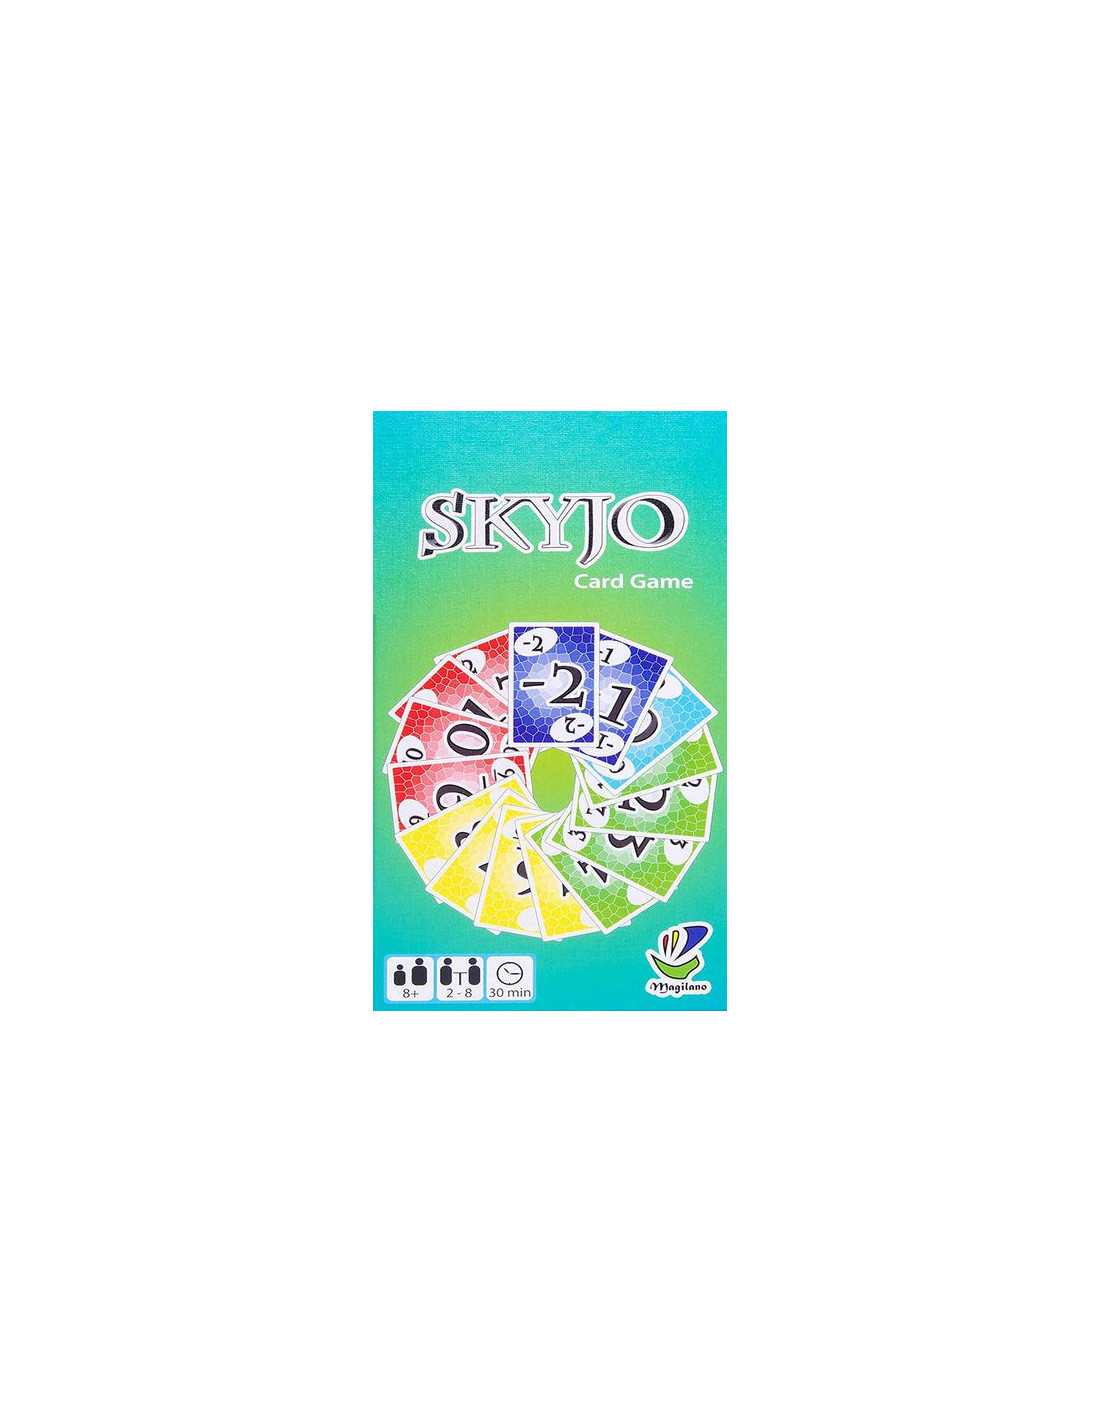 Skyjo - Card Game - Noble Knight Games